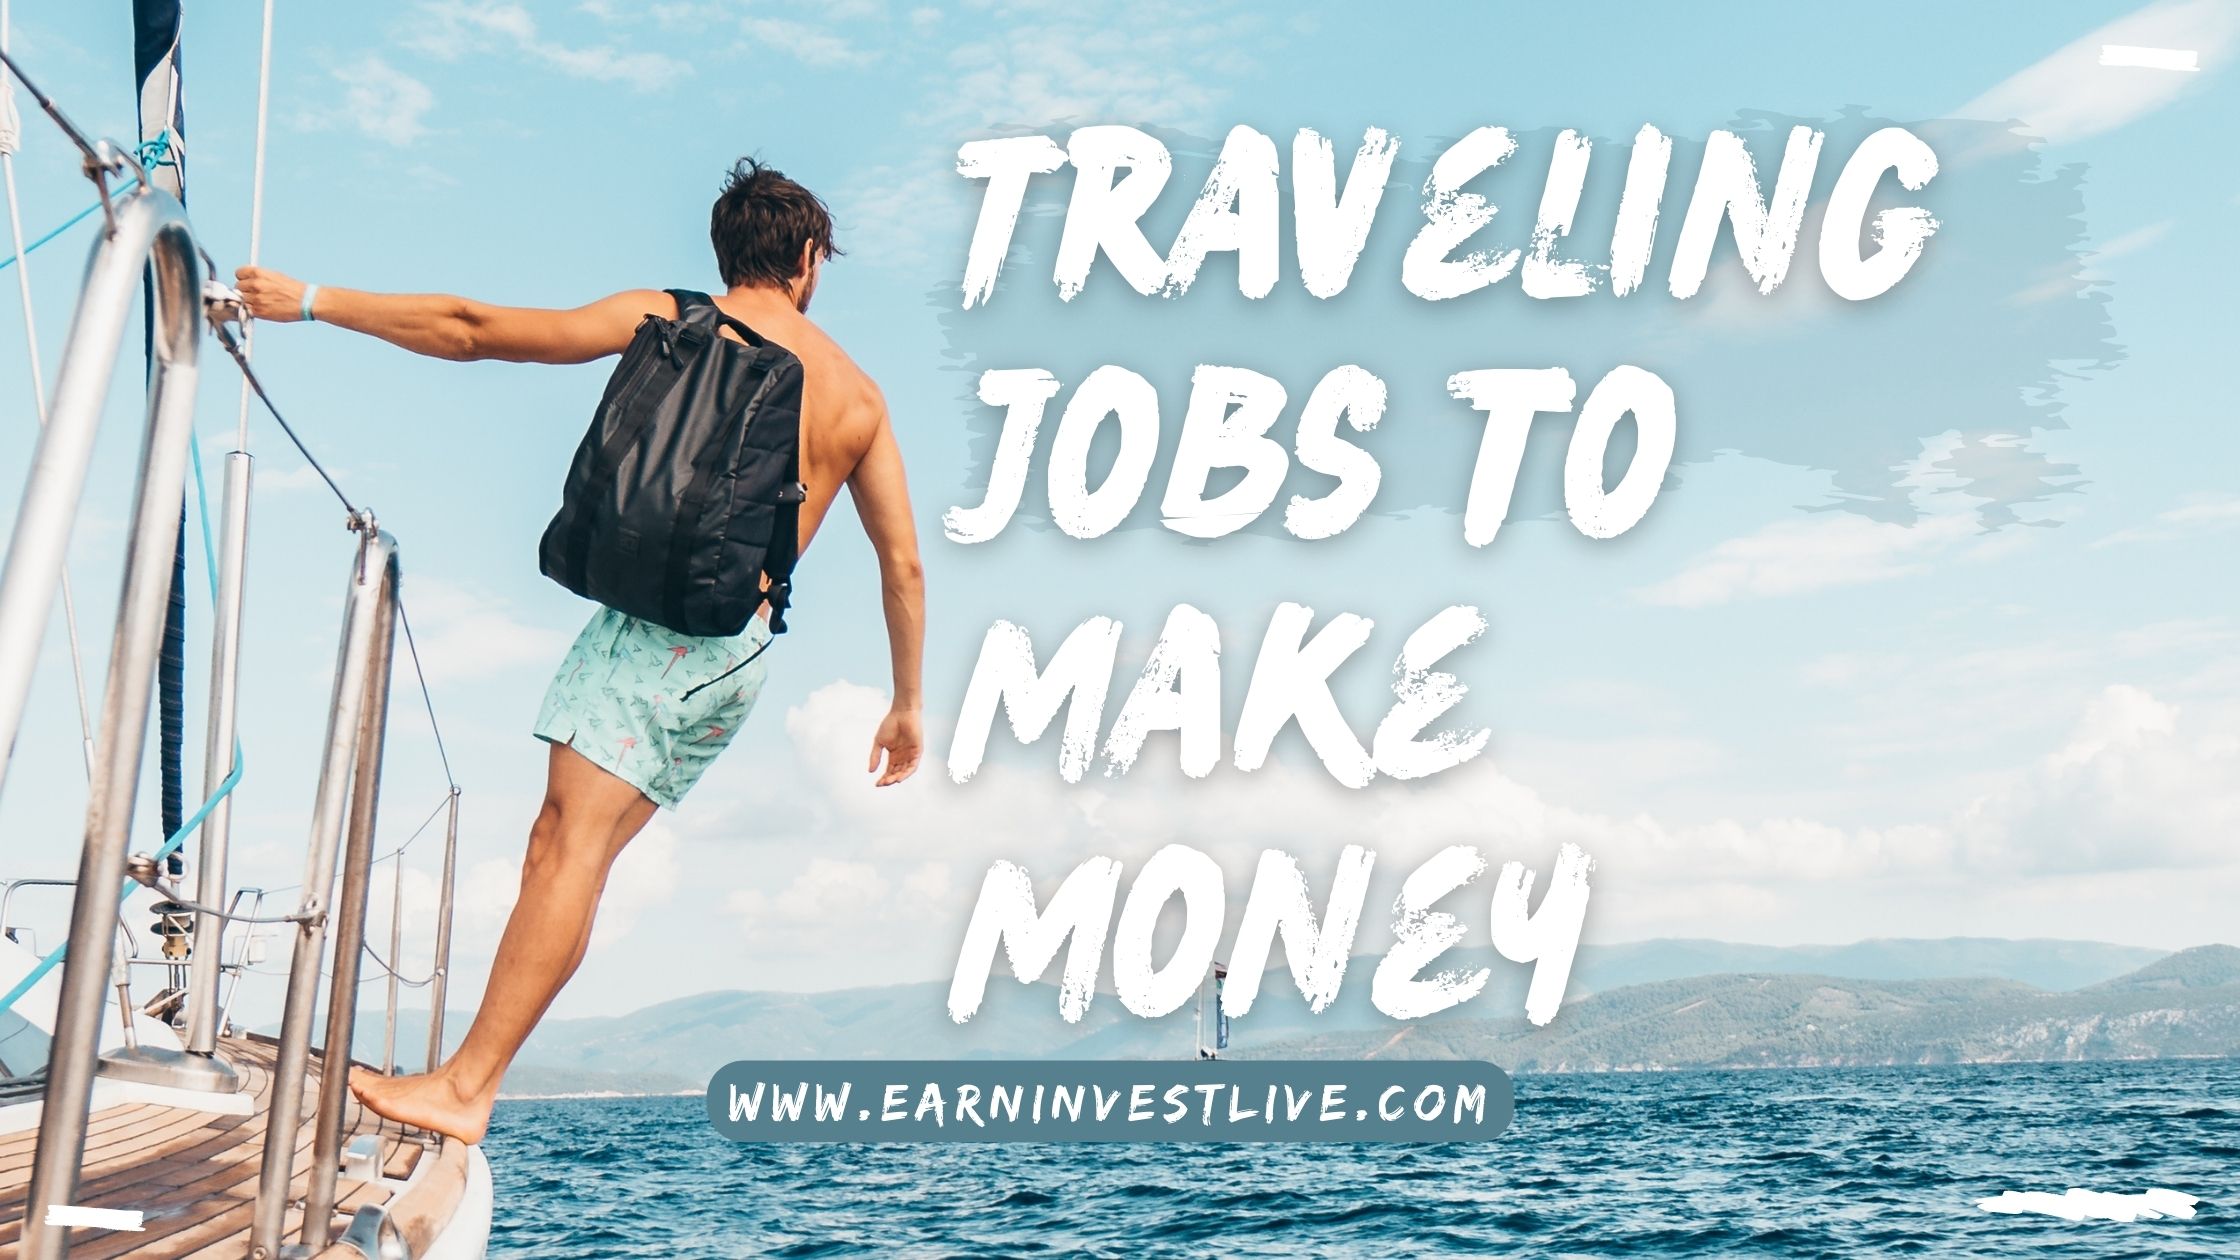 7+ Traveling Jobs to Make Money: How to Earn While Traveling